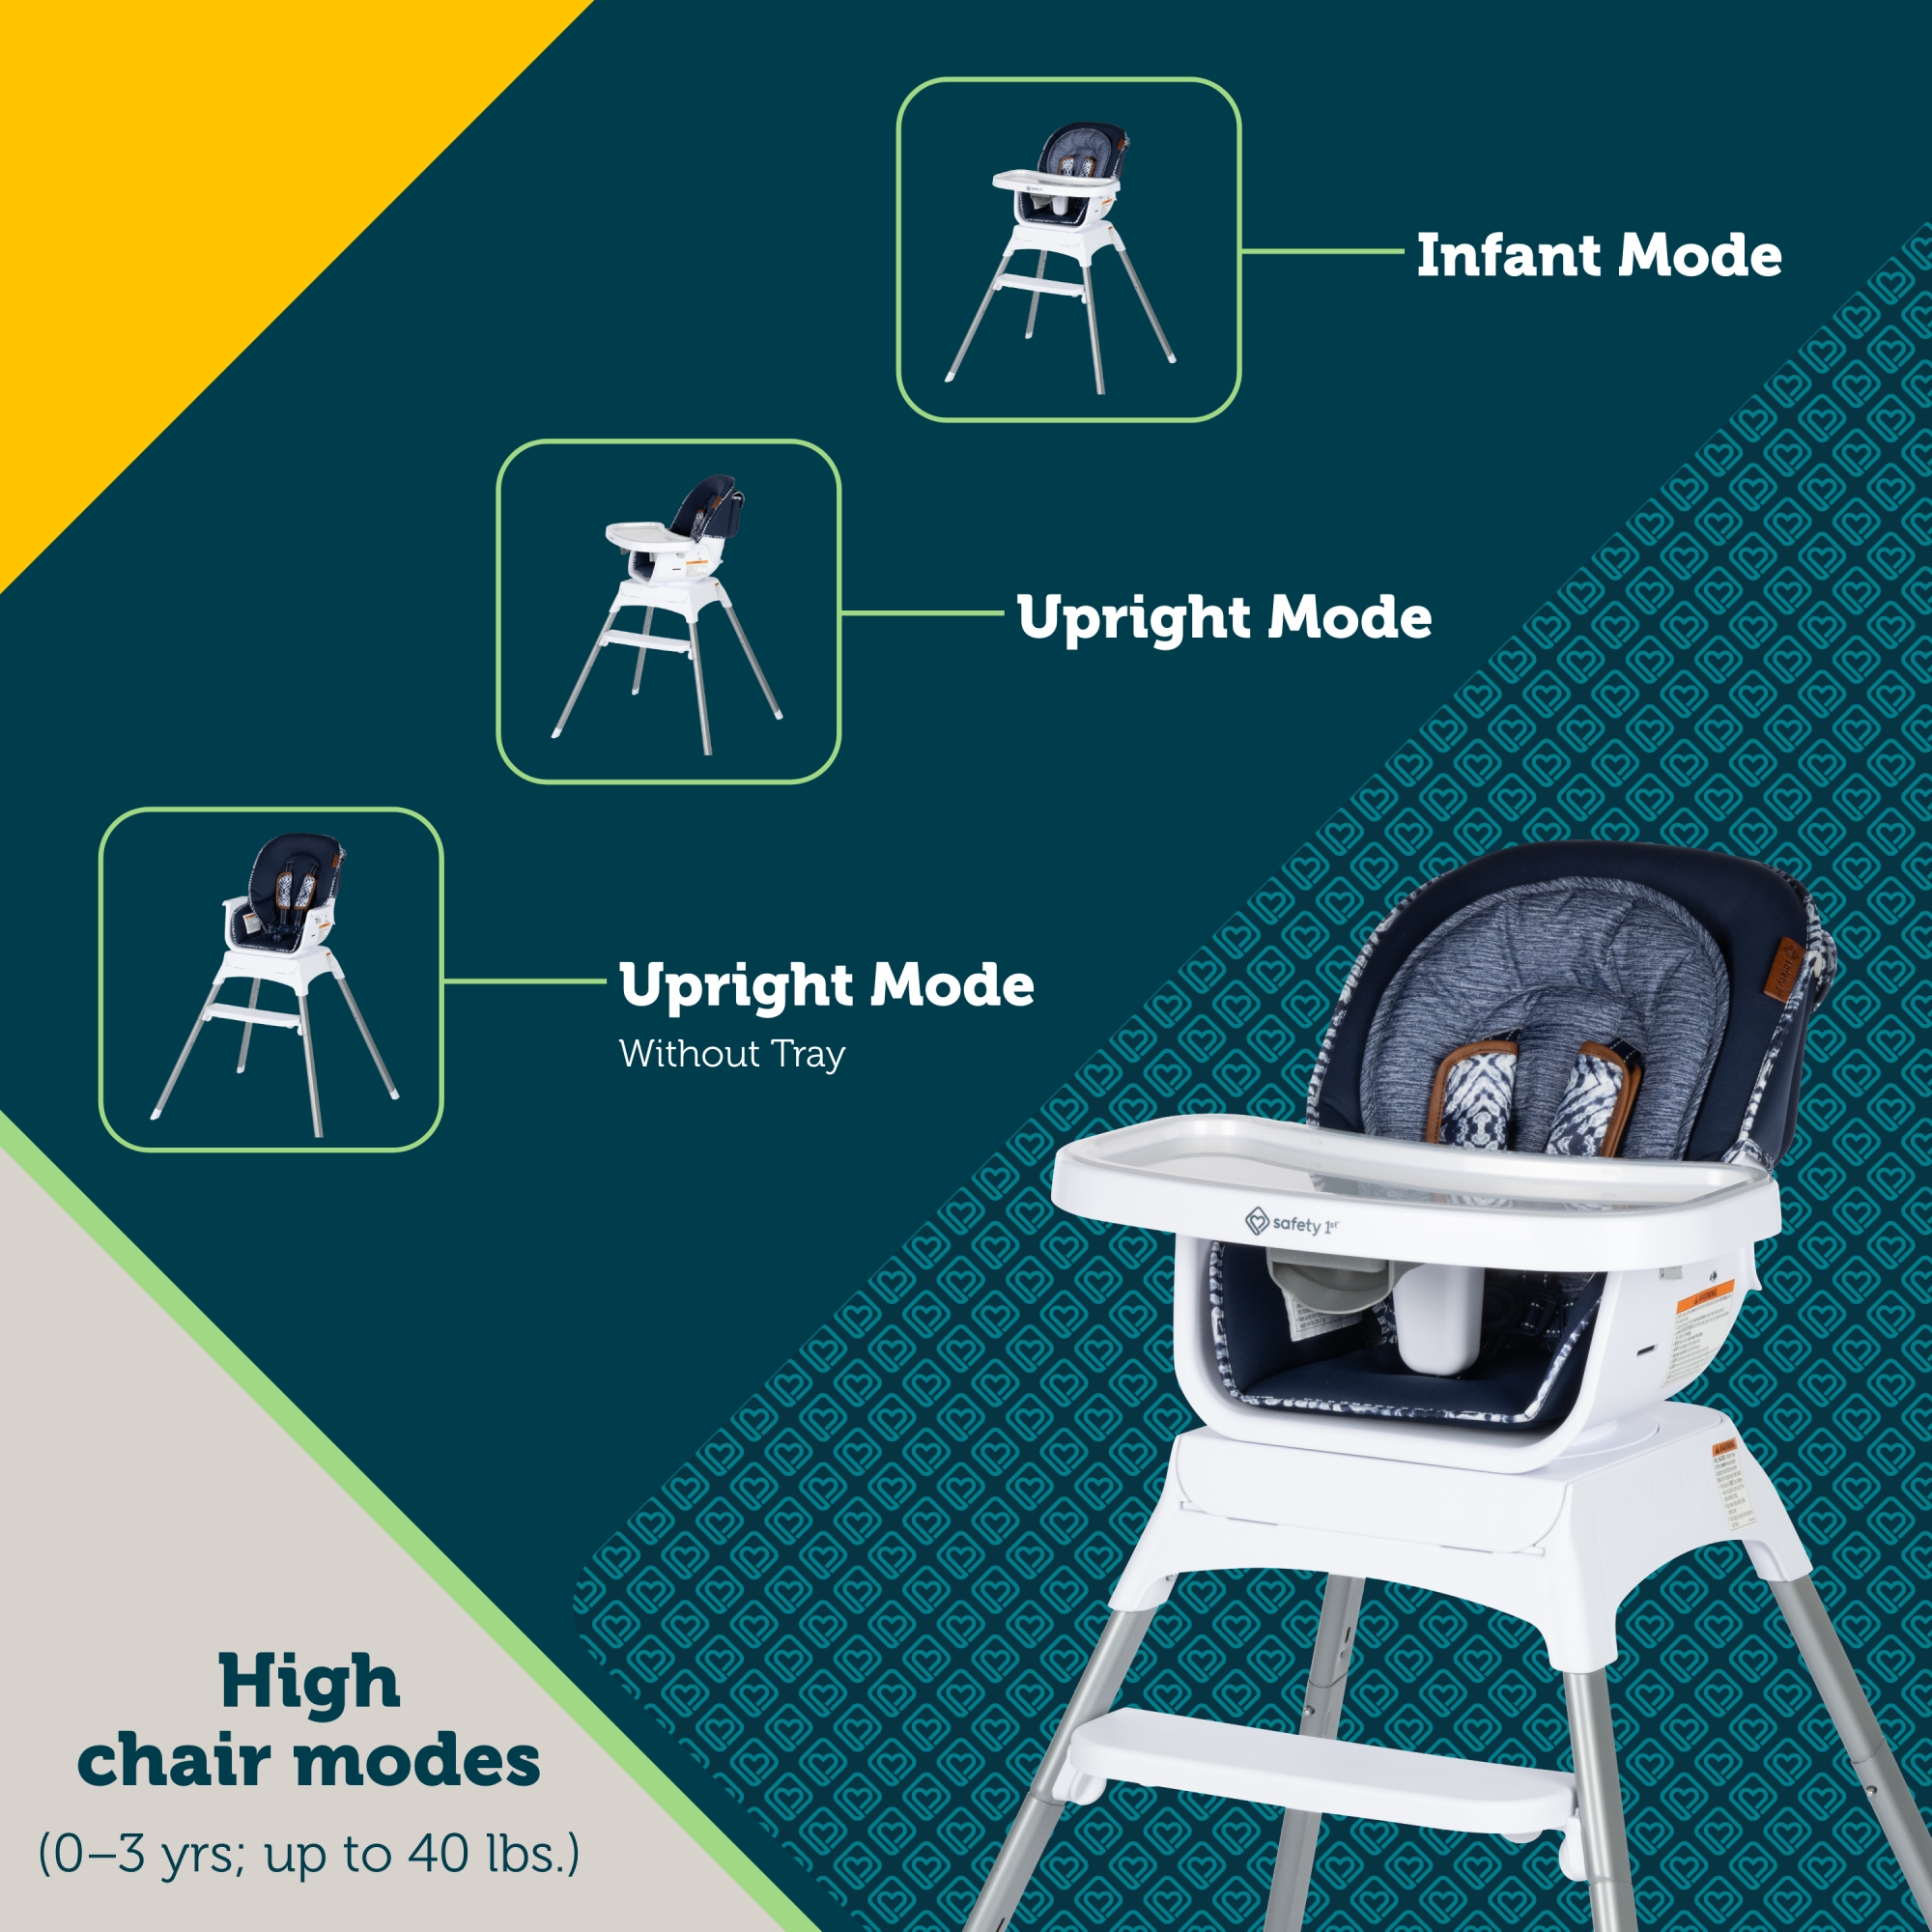 Grow and Go™ Rotating High Chair - High chair modes (0-3 yrs; up to 40 lbs.): infant mode, upright mode, upright mode, upright mode without tray